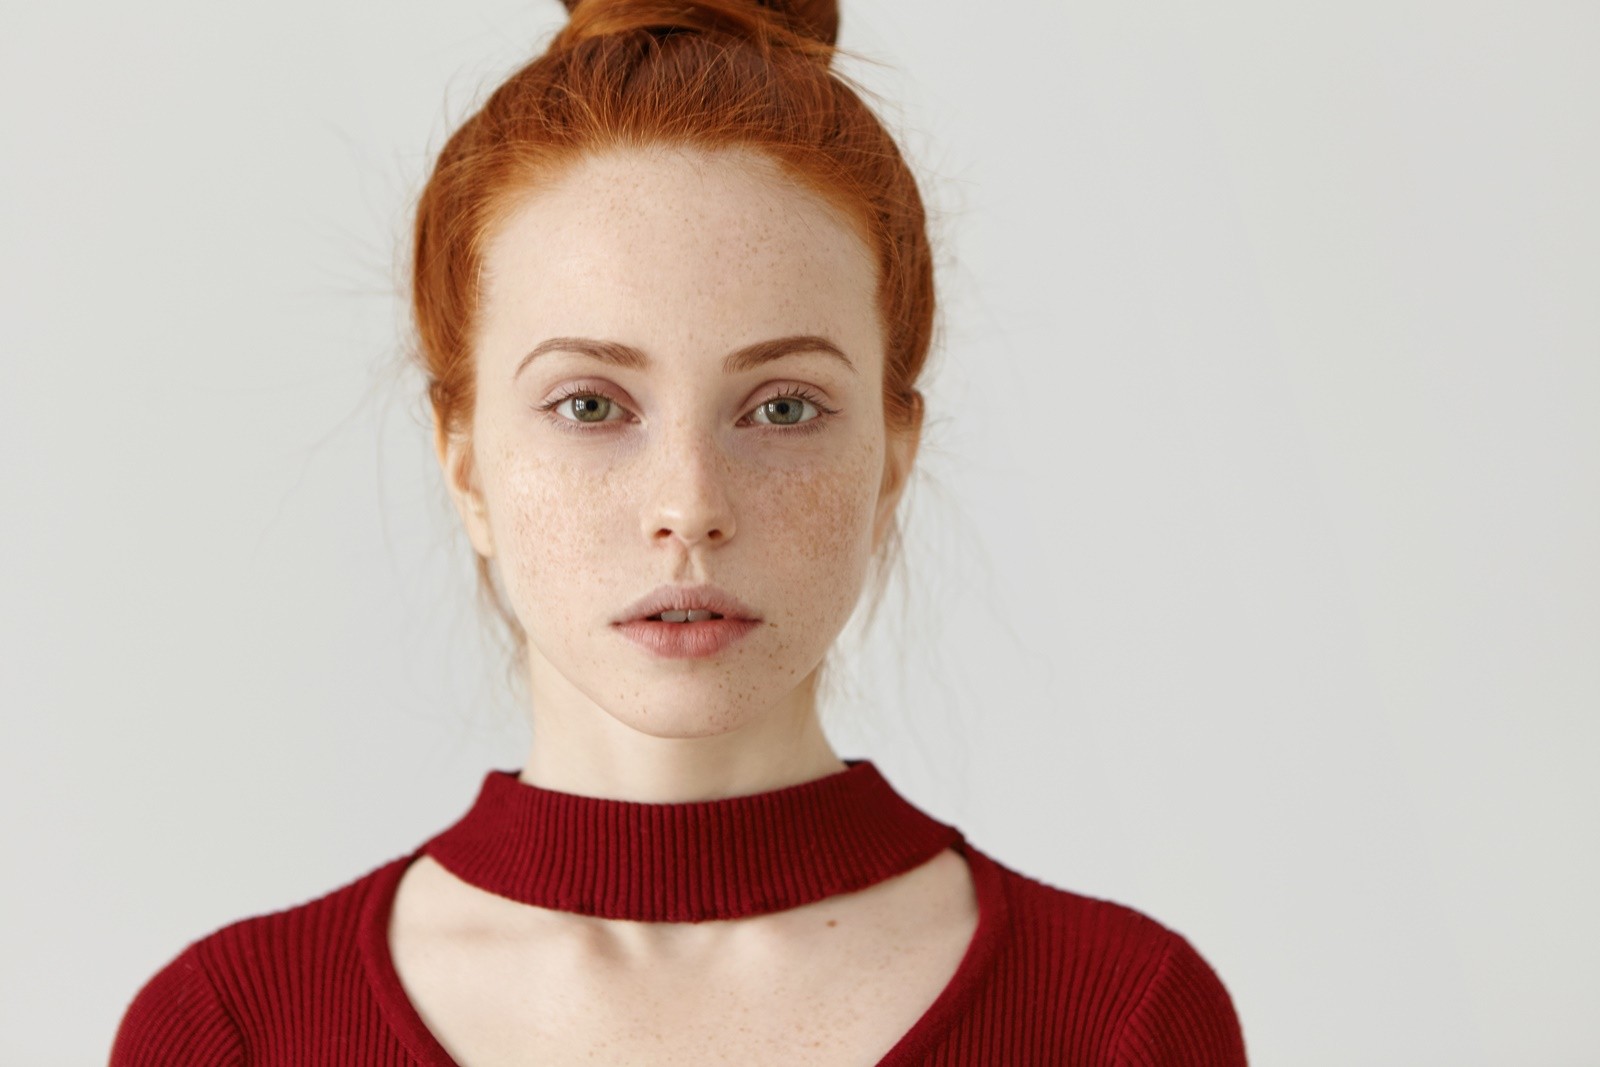 Close up shot of gorgeous young Caucasian woman with perfect freckled skin and ginger hair looking at camera with subtle smile, wearing beautiful maroon dress with cut out before going to party